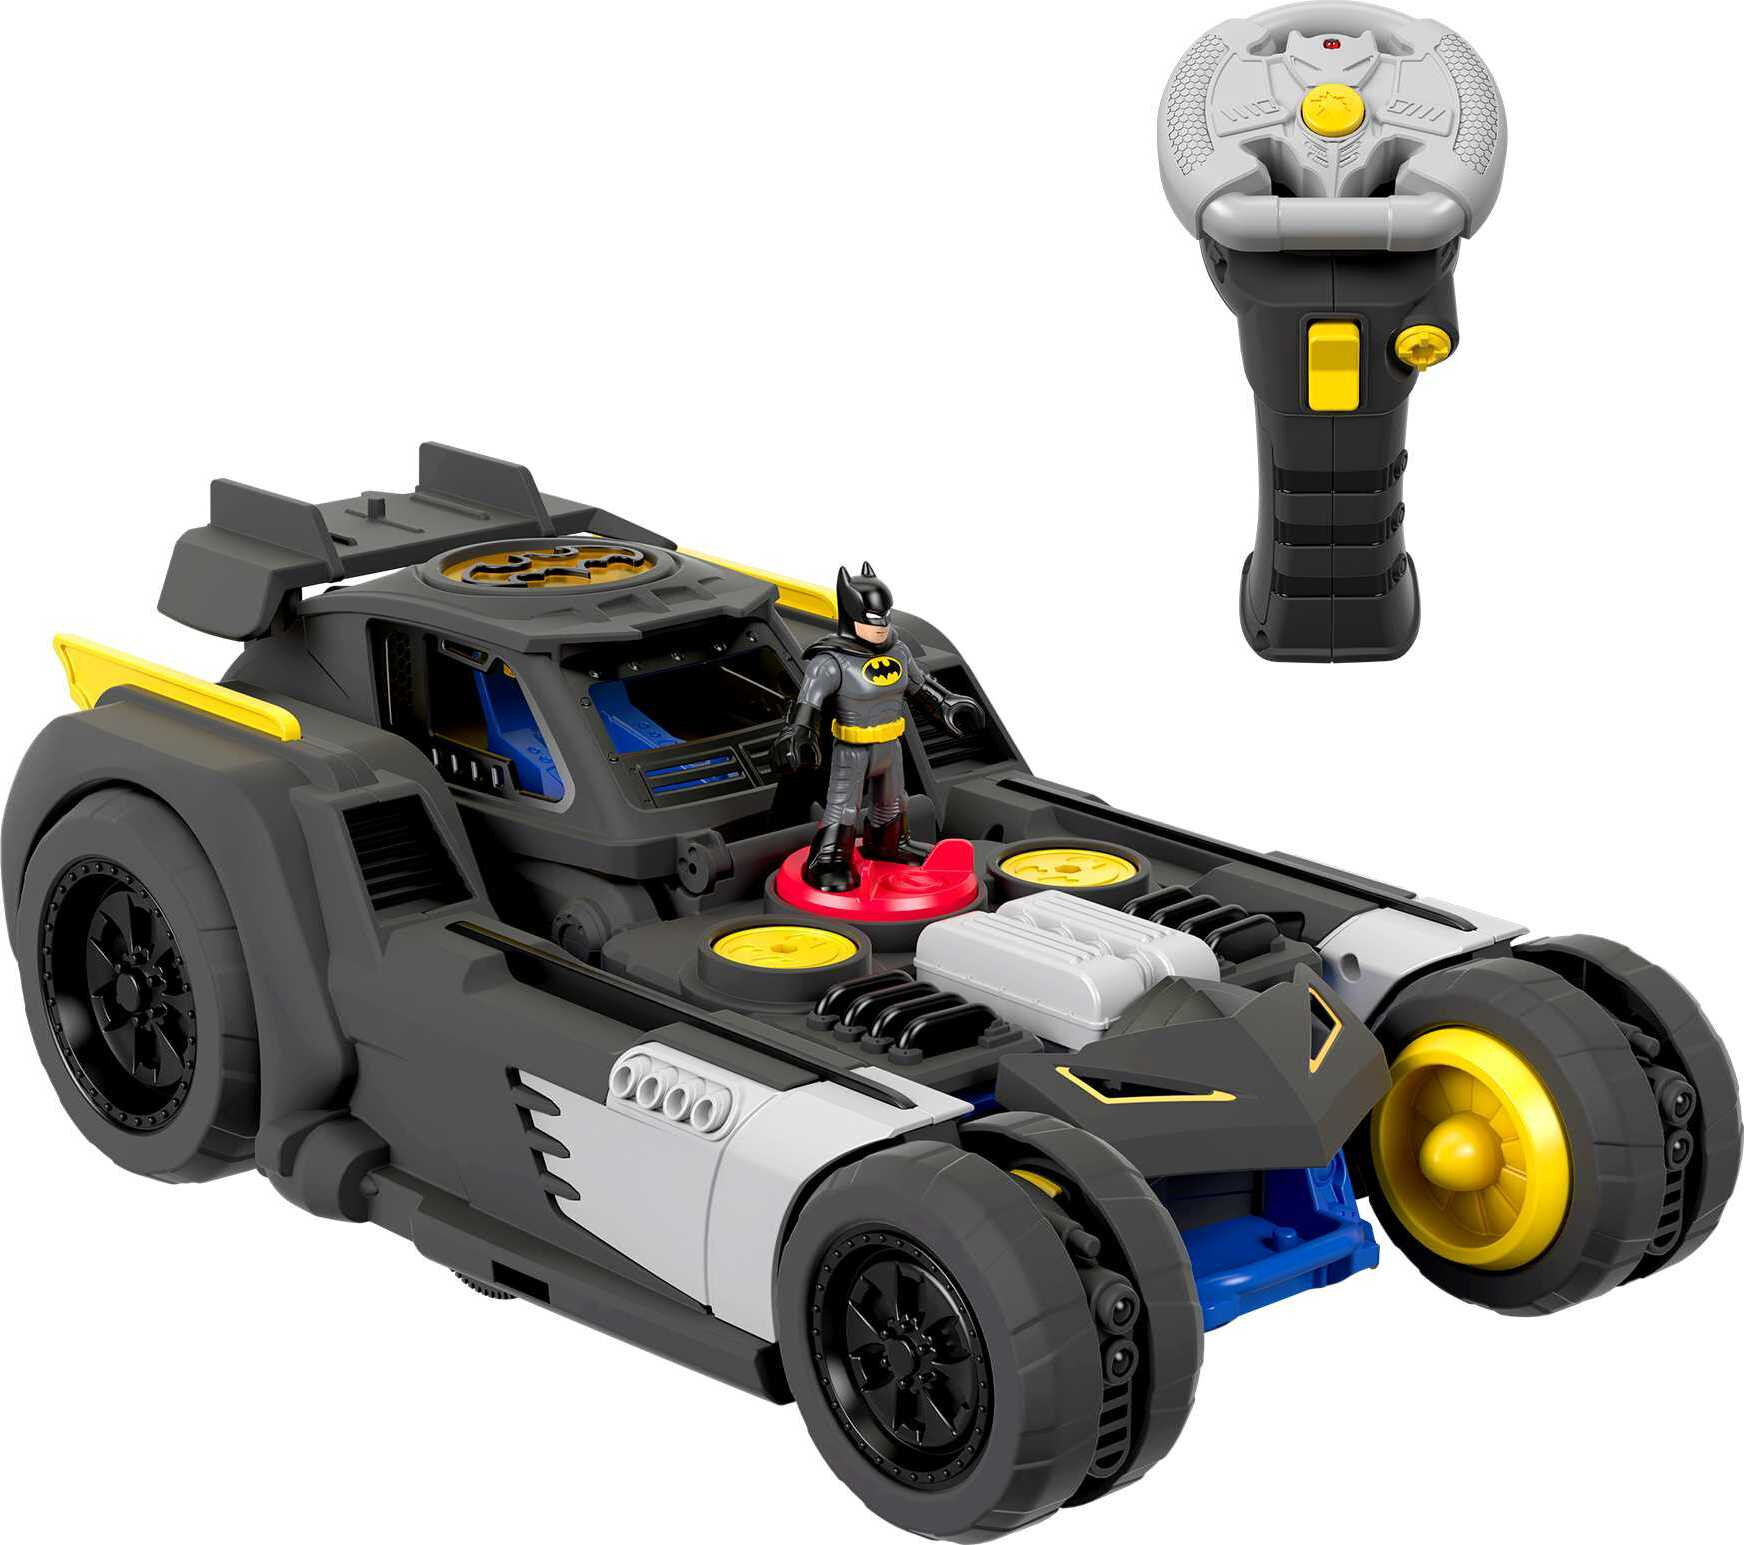 Imaginext DC Super Friends Transforming Batmobile Battery-Powered RC Car with Lights & Sounds - image 1 of 9